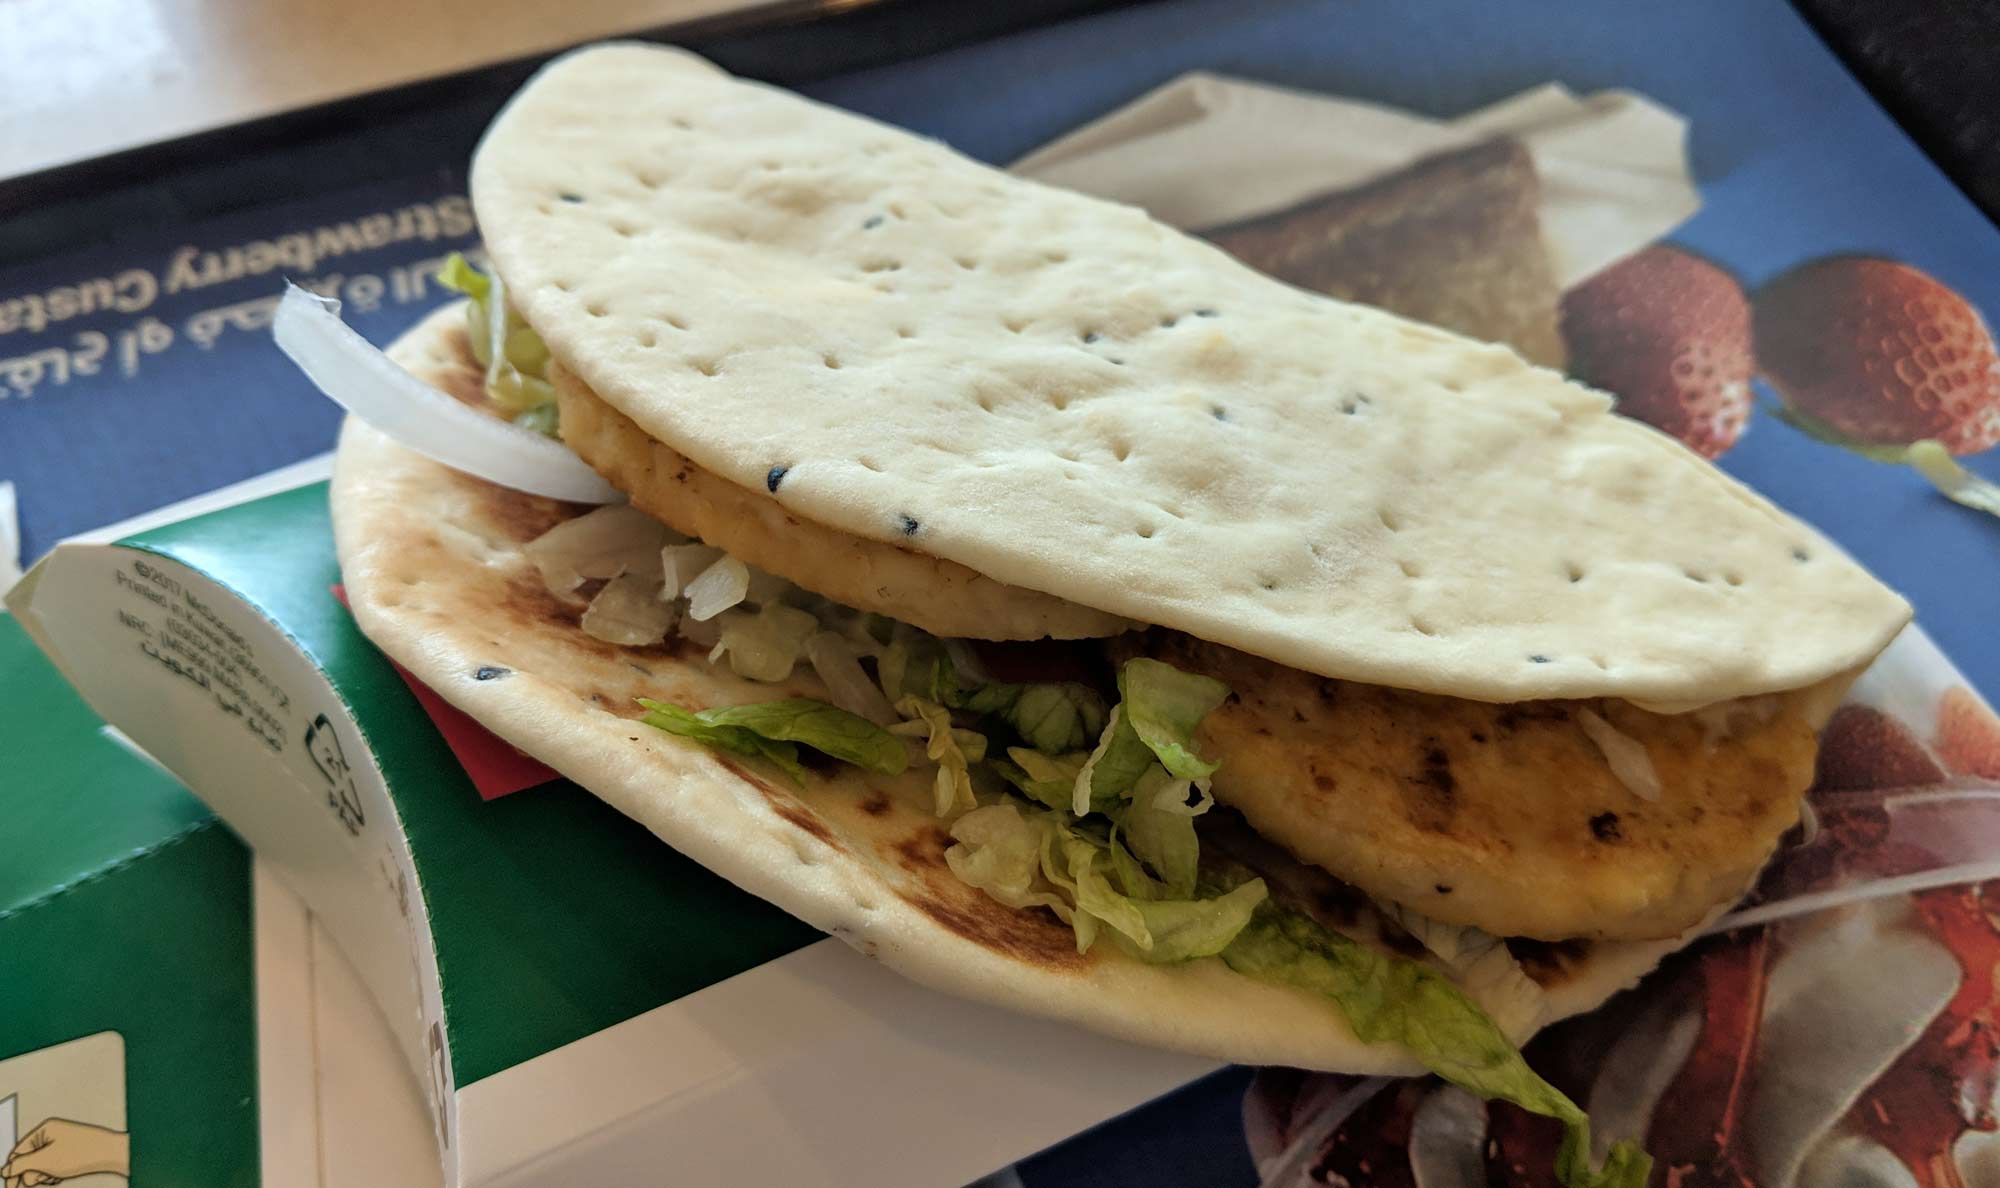 McDonalds Chicken Flatbread placed on a table